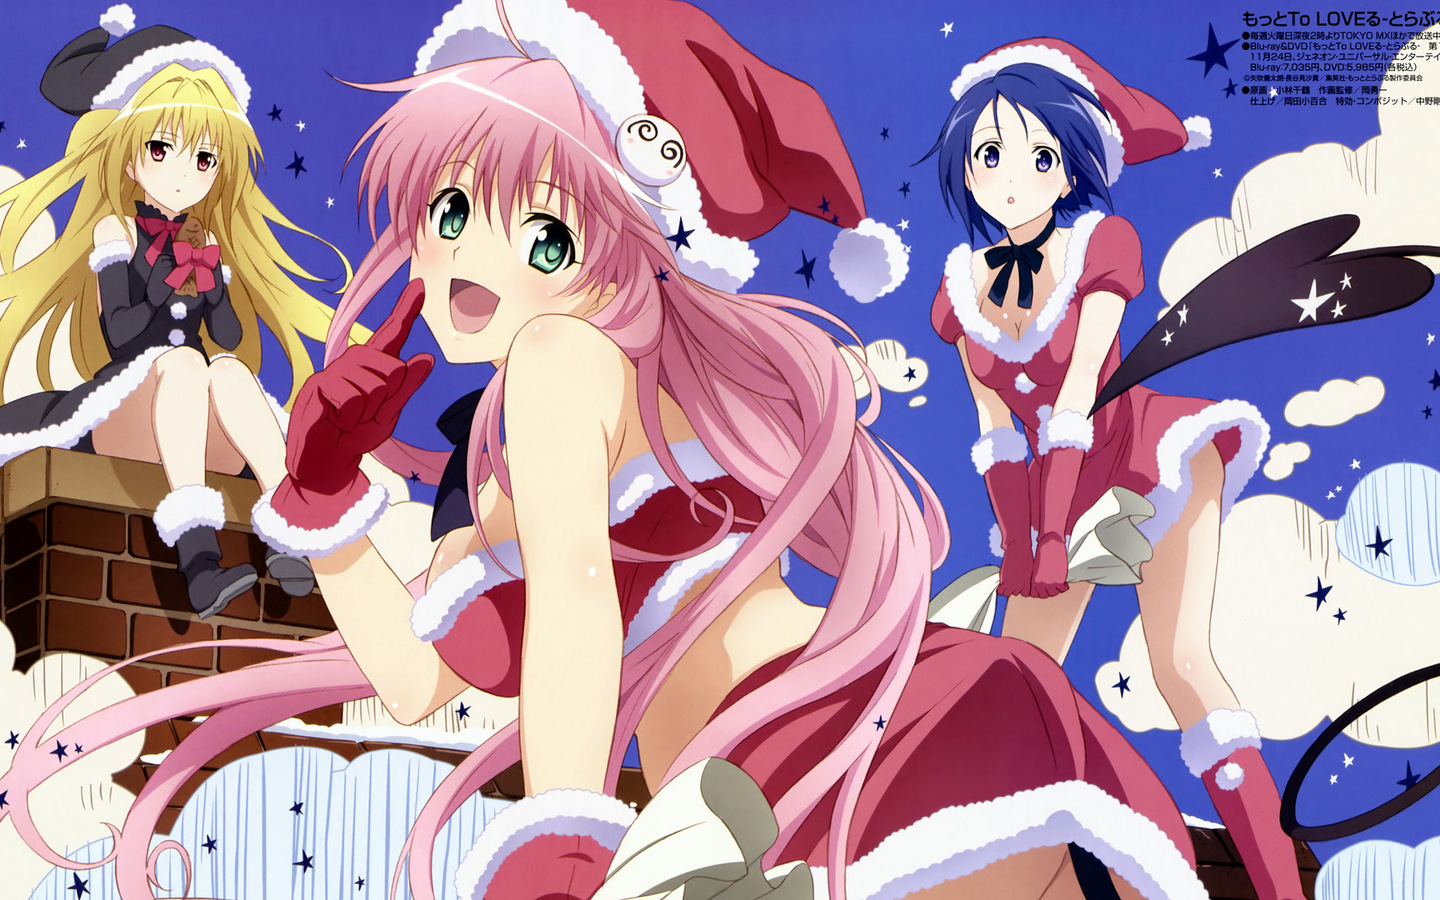 Hd Wallpapers Free Charming Anime Girls In Christmas - Anime Girl Christmas  Background - 1440x900 Wallpaper 